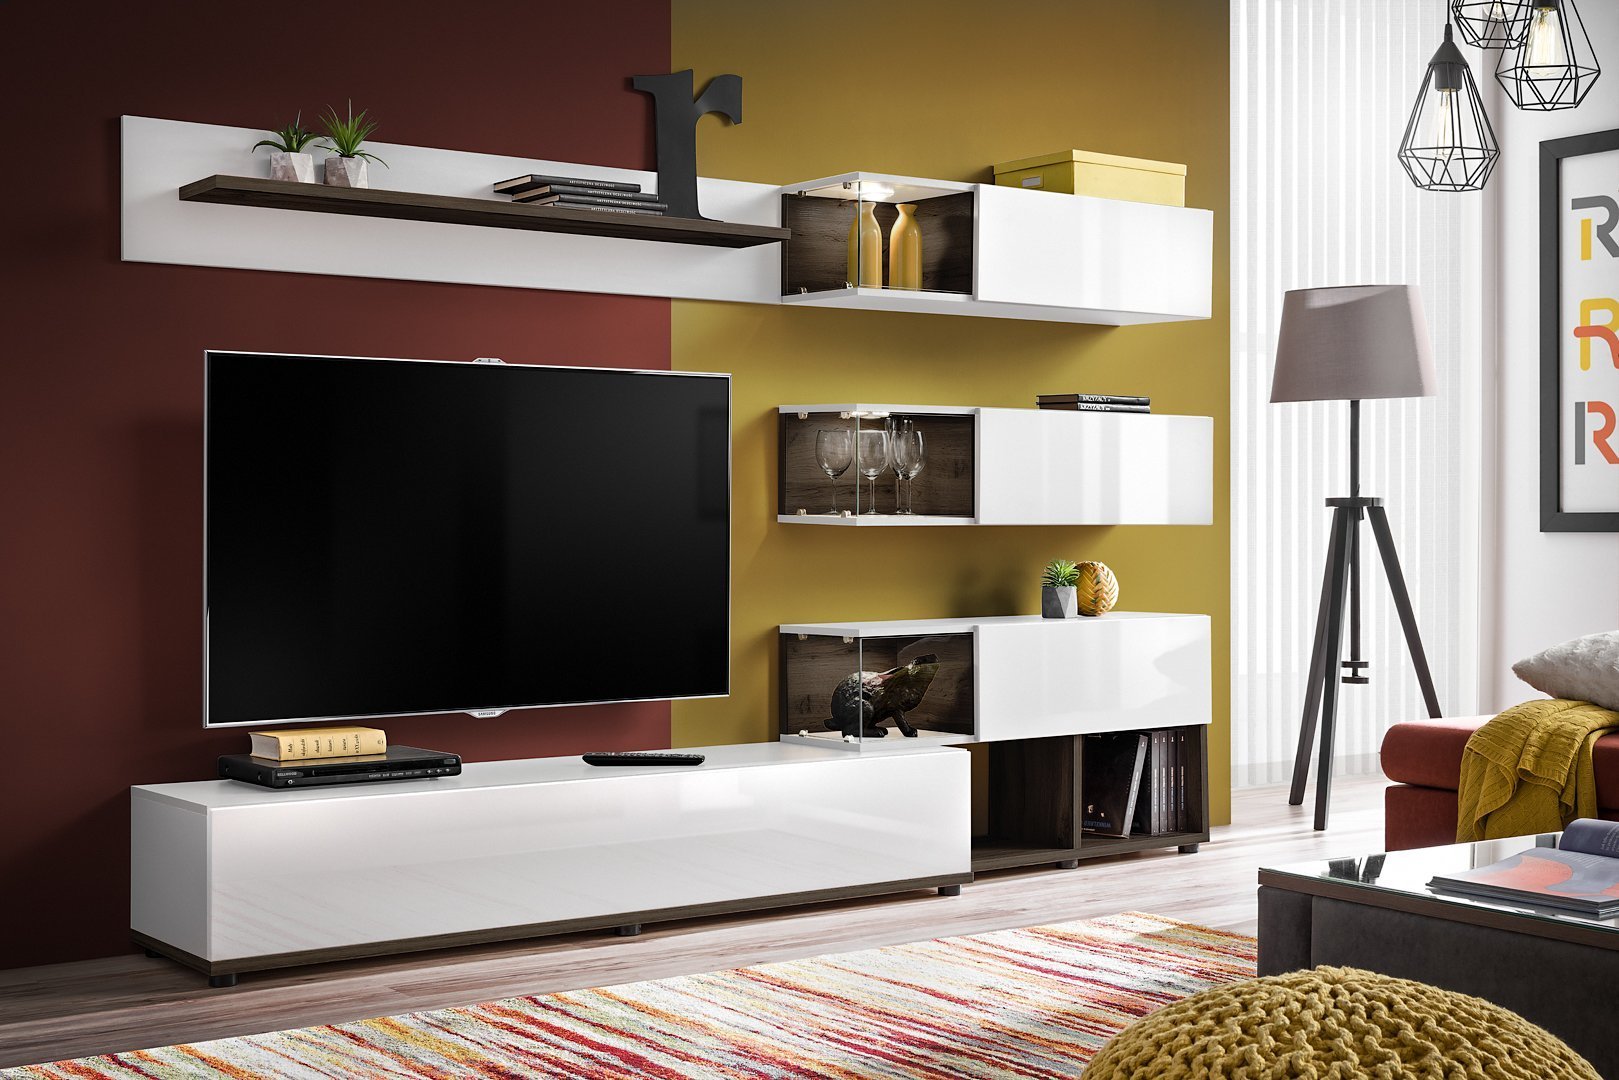 View Silk in White Gloss Entertainment Unit information